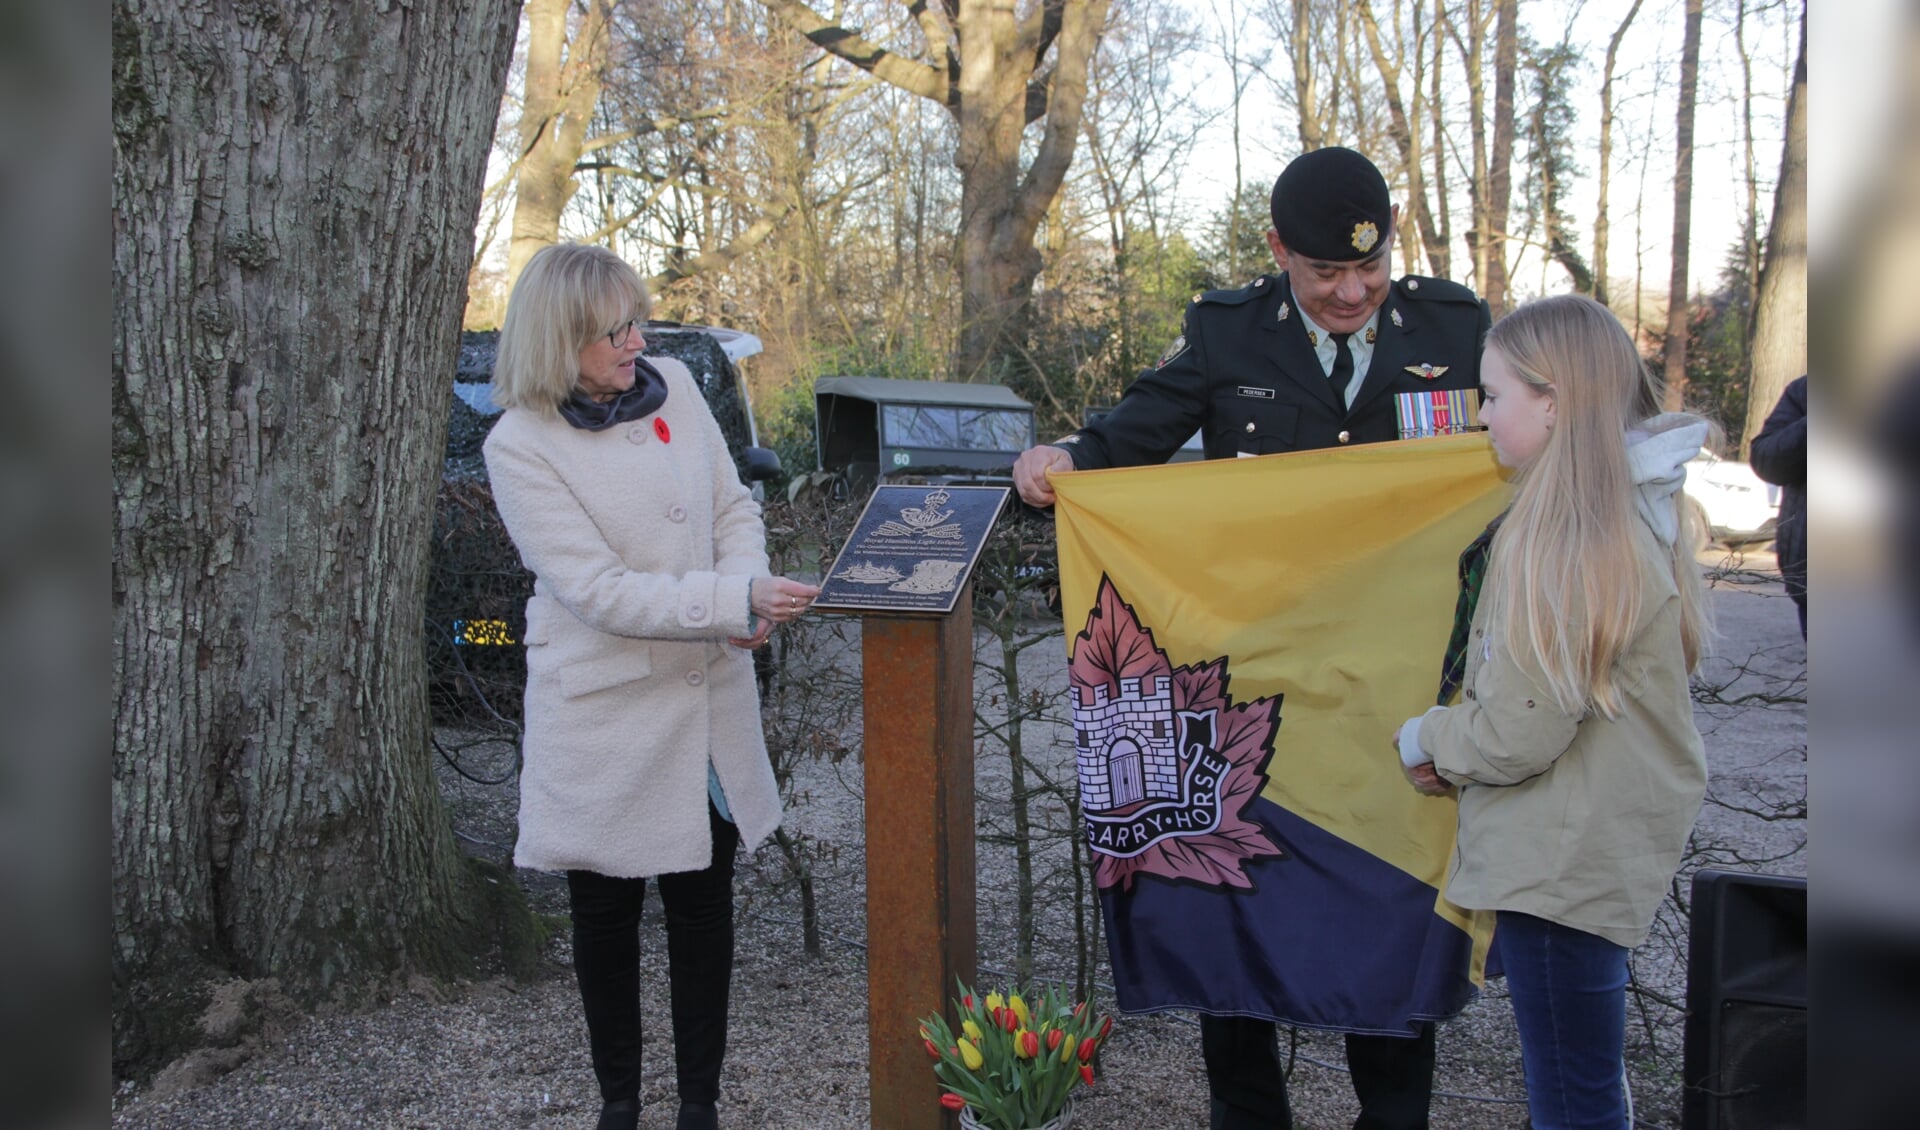 Onthulling plaquette. 